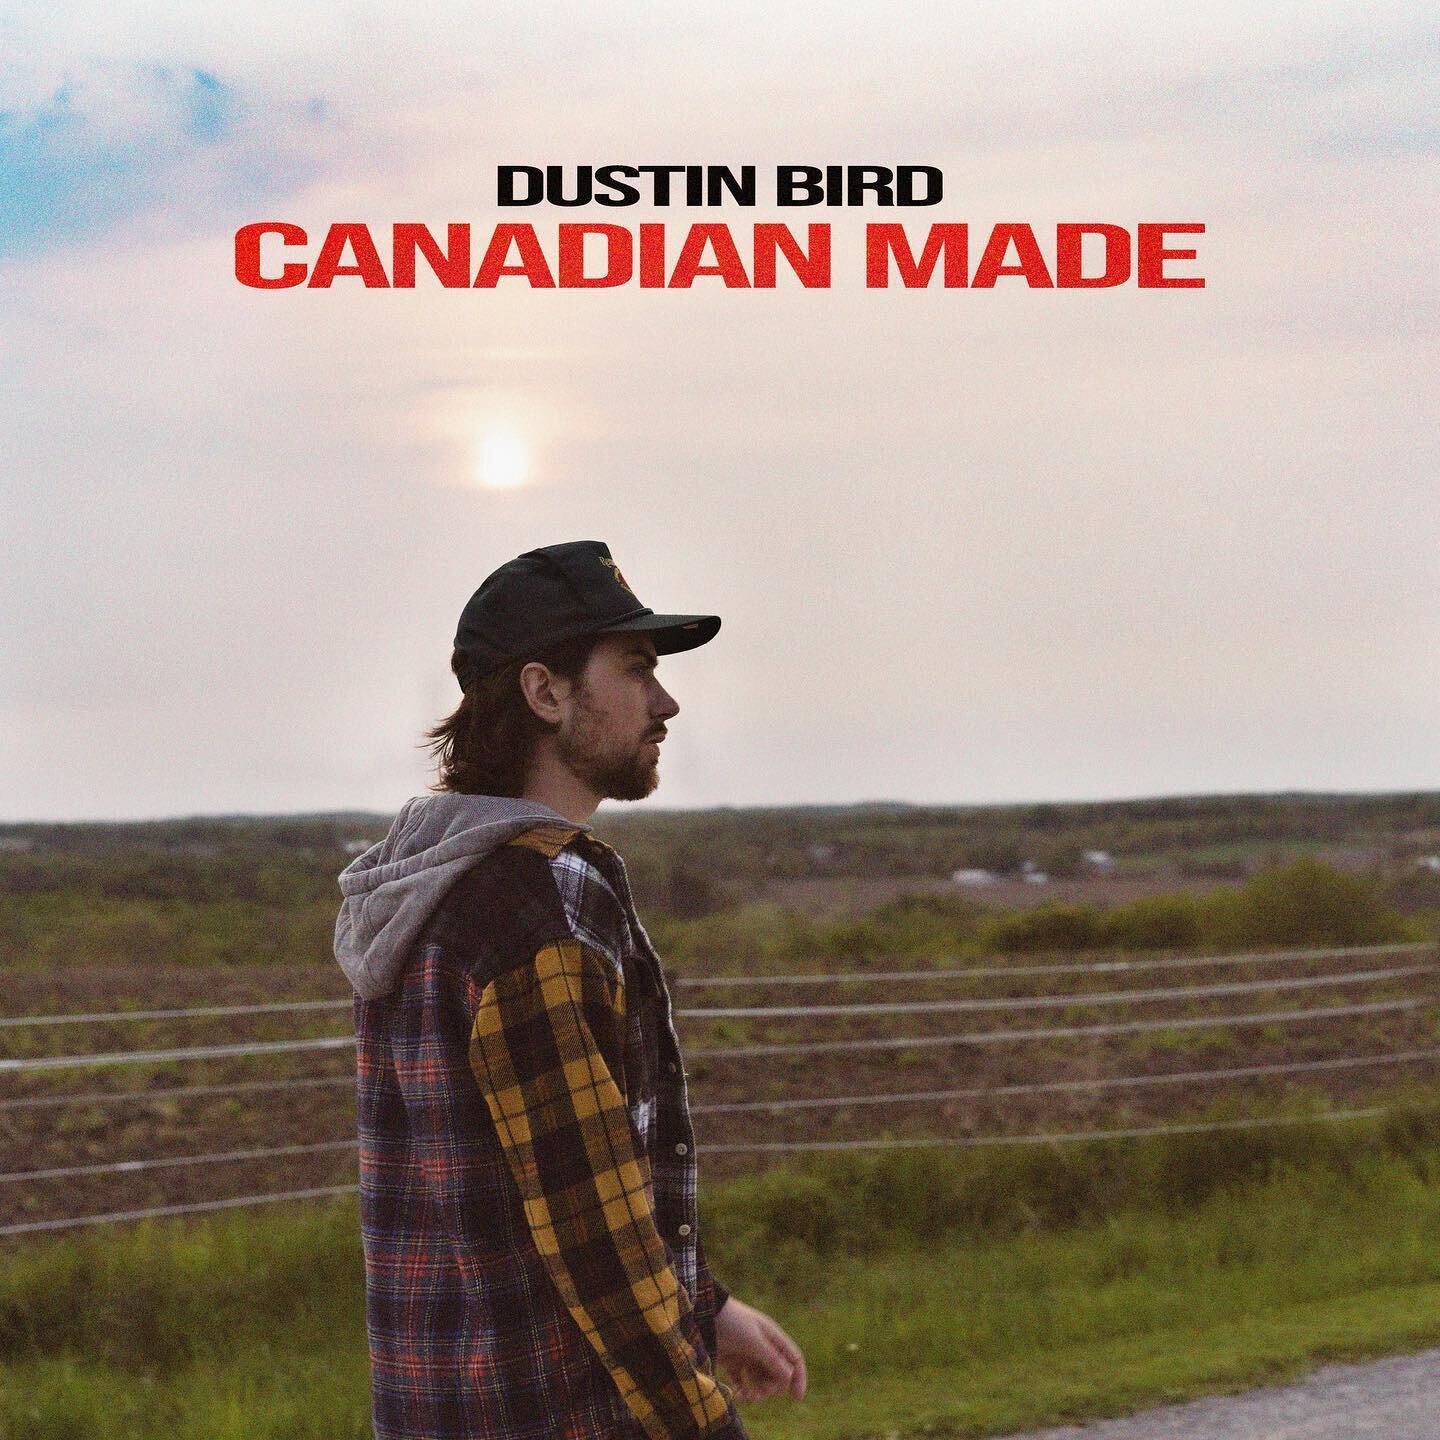 Canadian Made by @dustin_bird is out now! 📸 visuals by yours truly